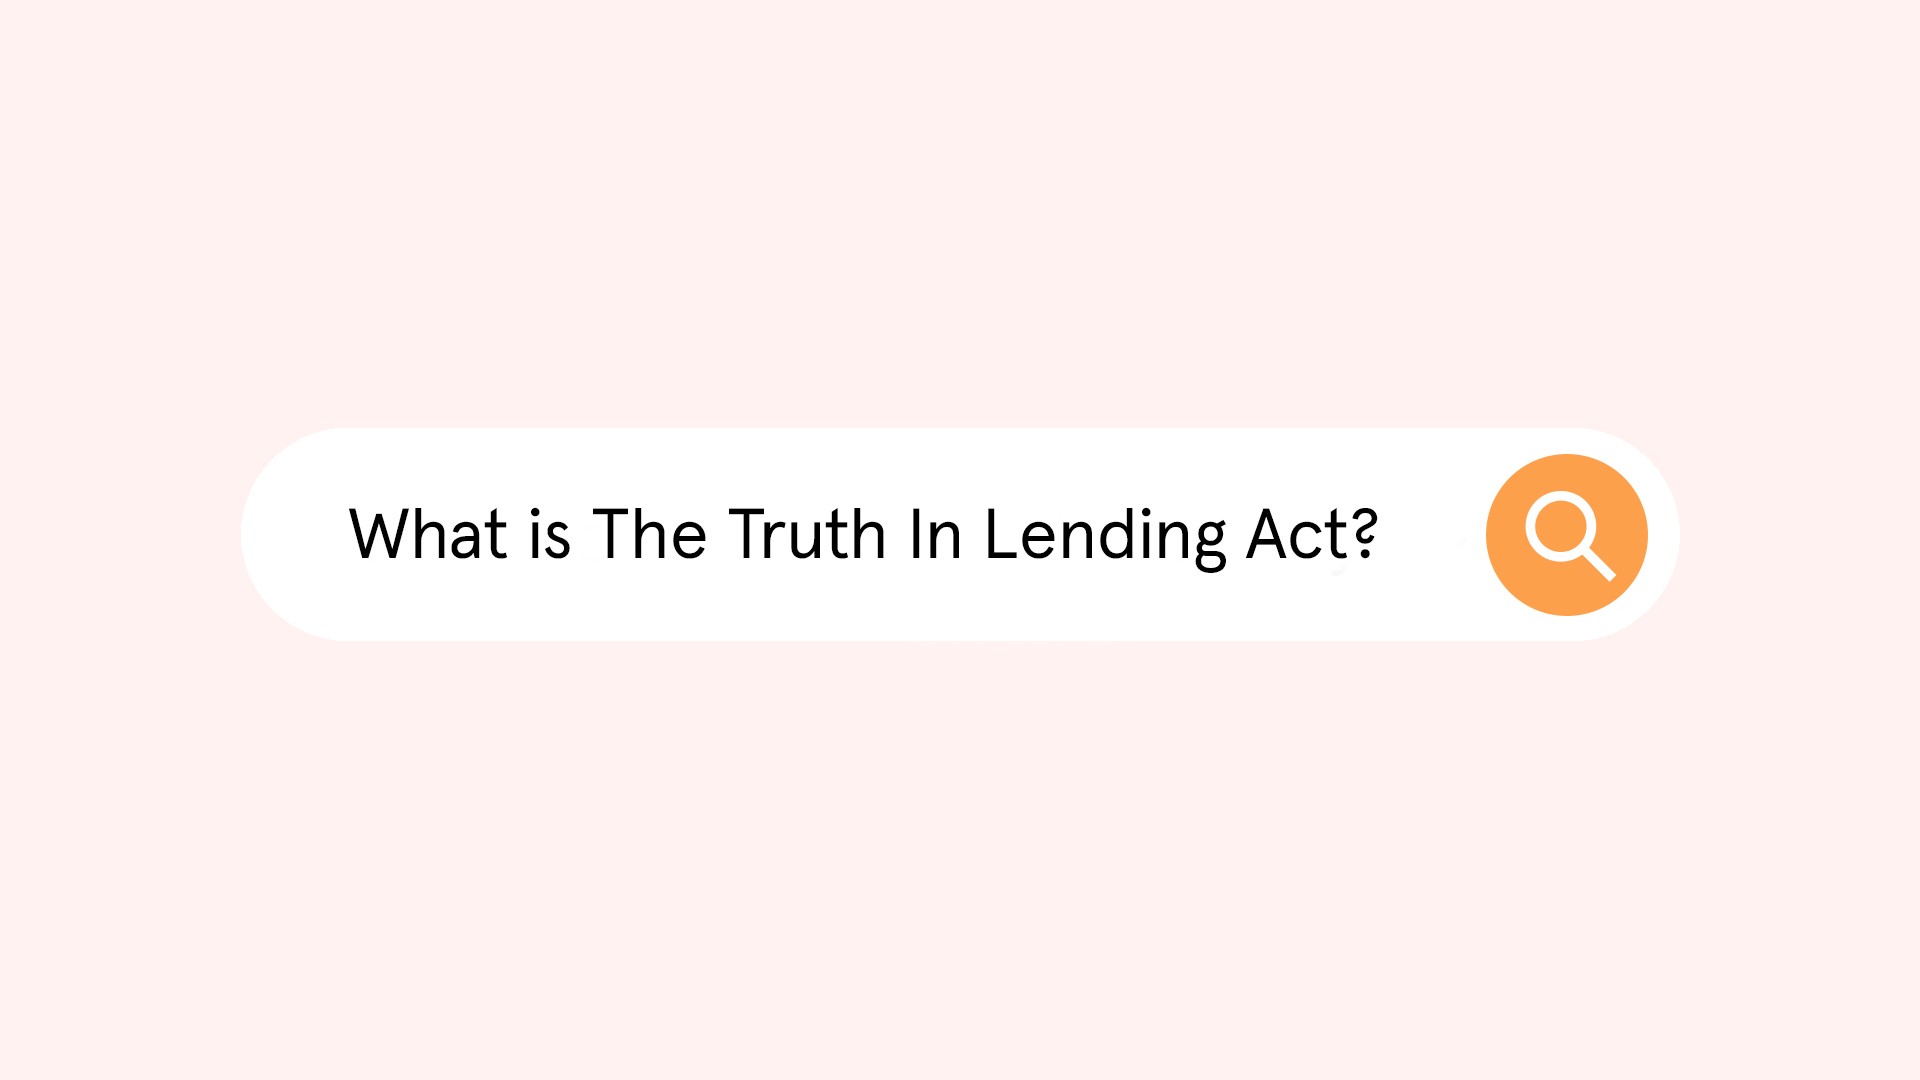 What is the Truth in Lending Act?